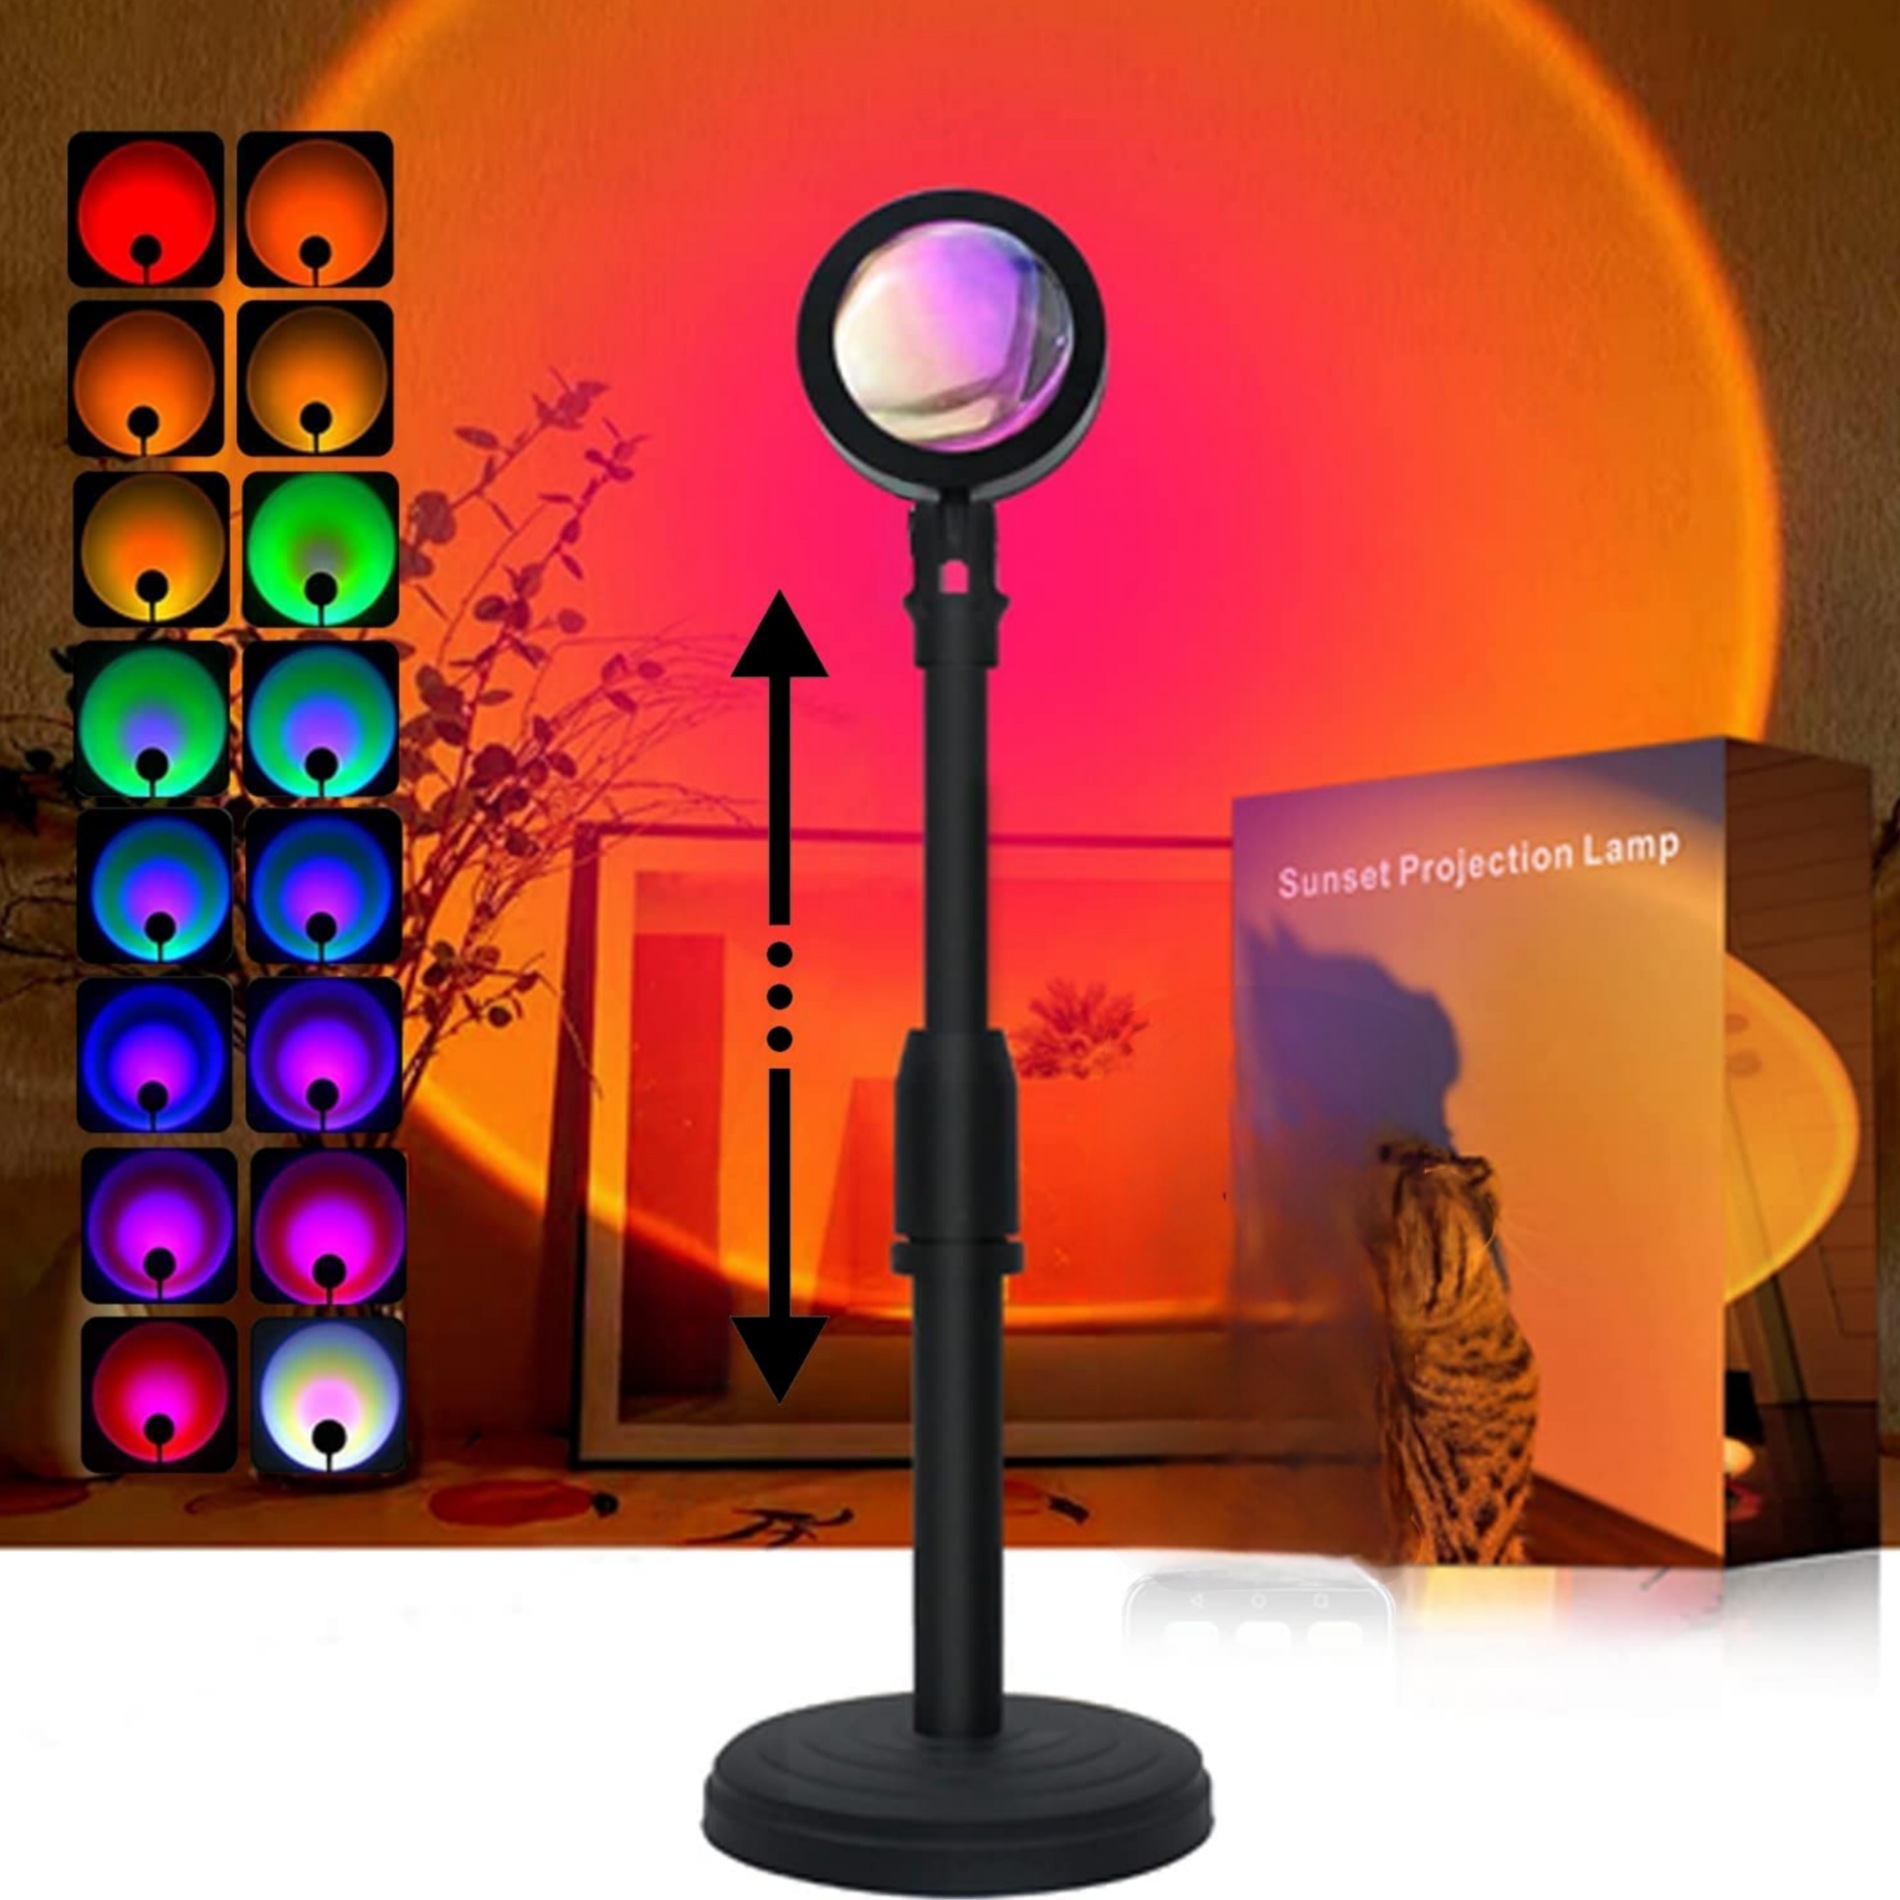 Remote Control RGB Sunset Lamp Projector 16 Colors Changing RGB | Mobile  Photography Backgrounds Accessories Lighting Kit Wallpaper